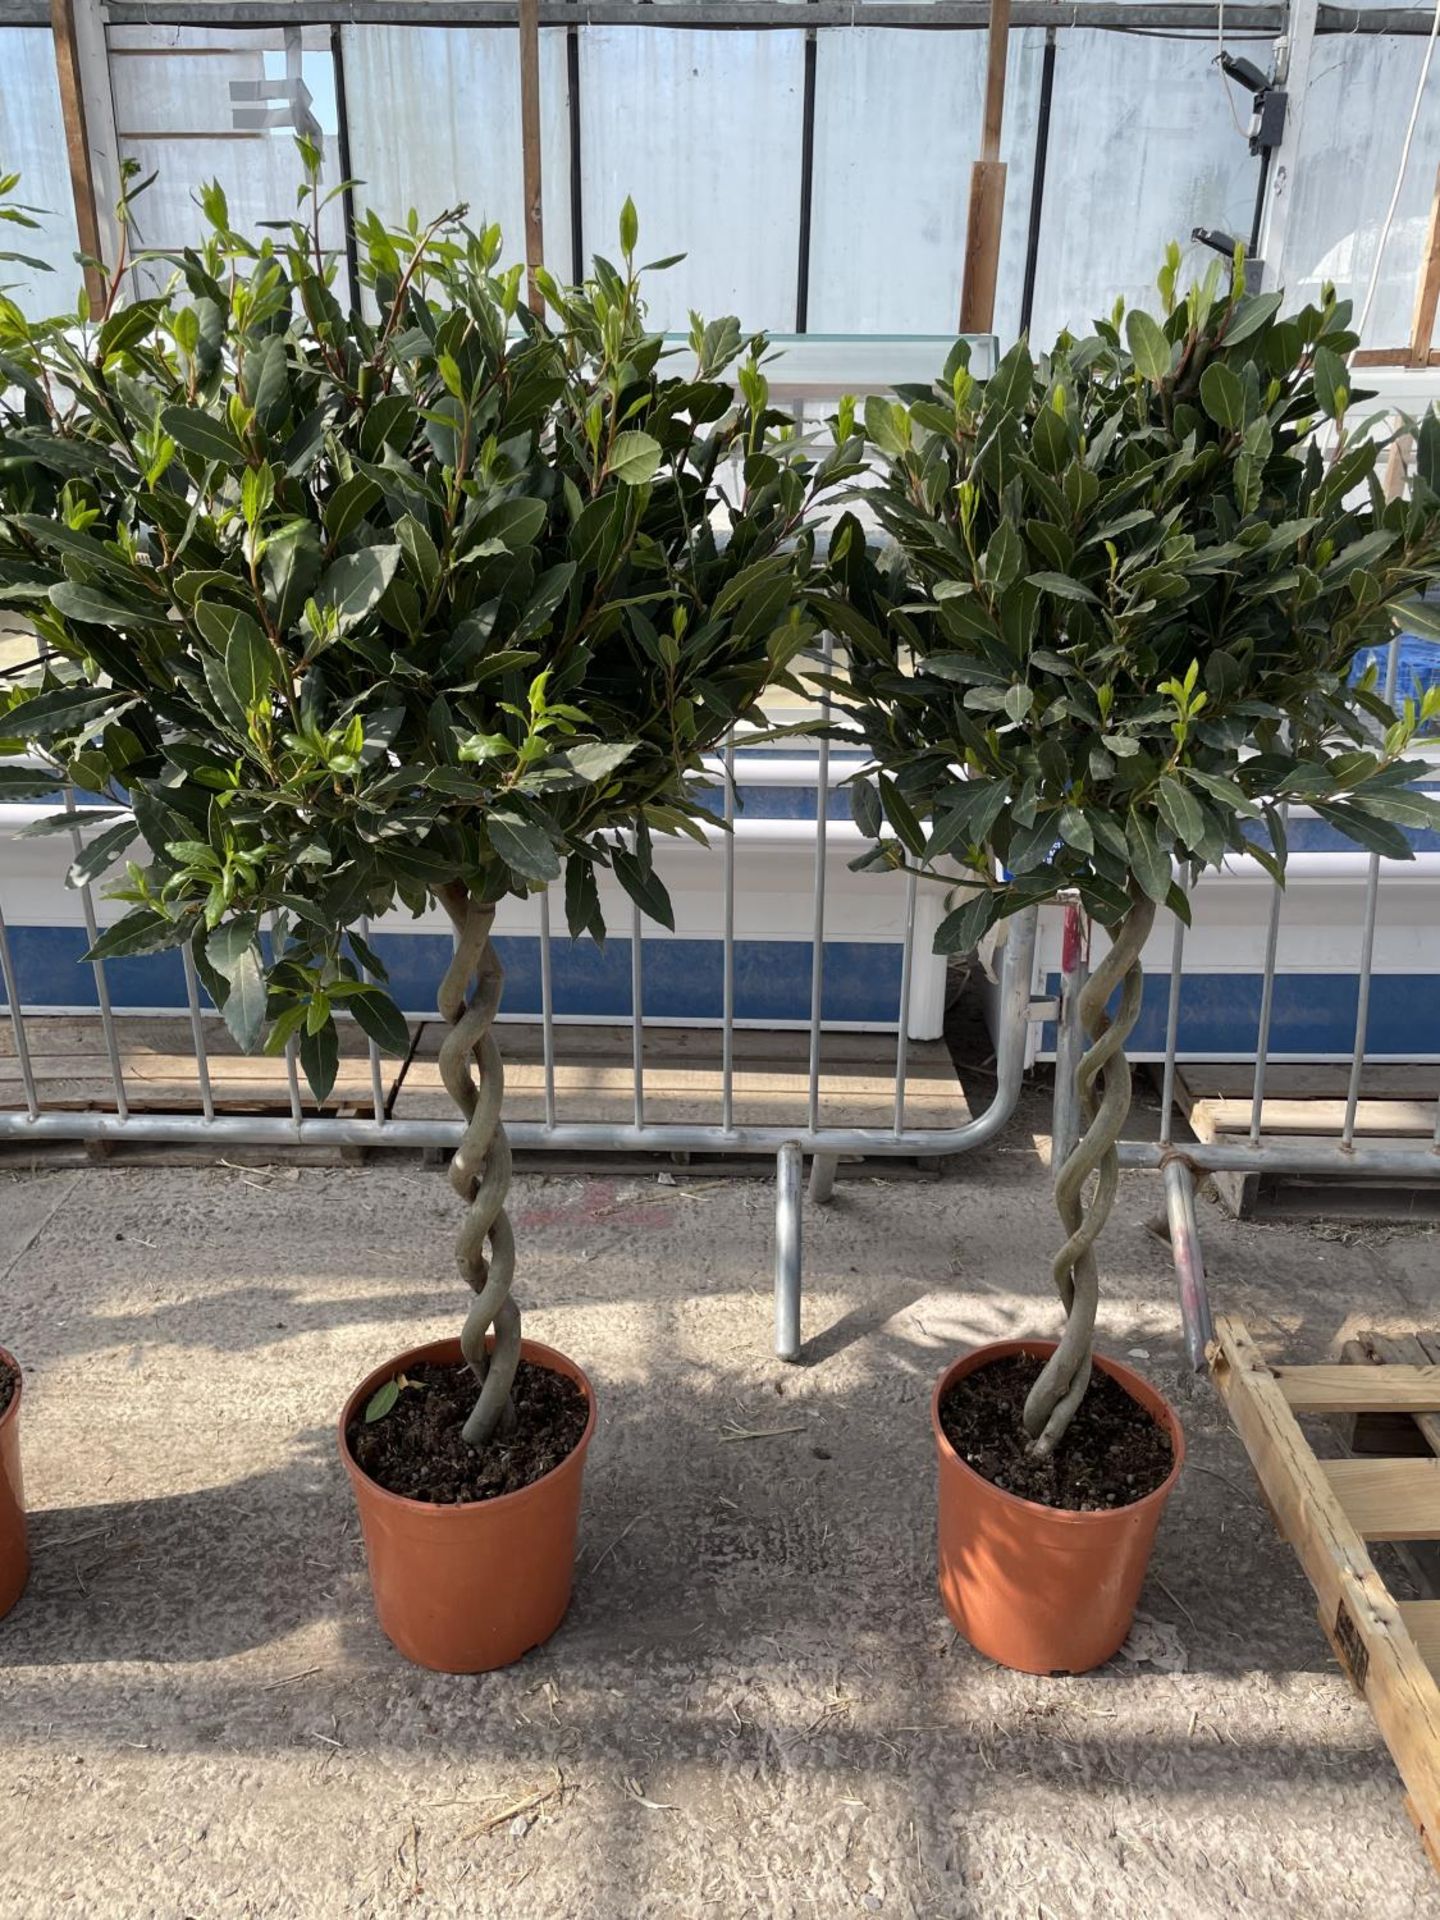 EIGHT LAURUS NOBILIS STANDARD BAY TREES WITH DOUBLE SPIRAL TWISTED STEMS APPROX 140CM HIGH IN A 7.